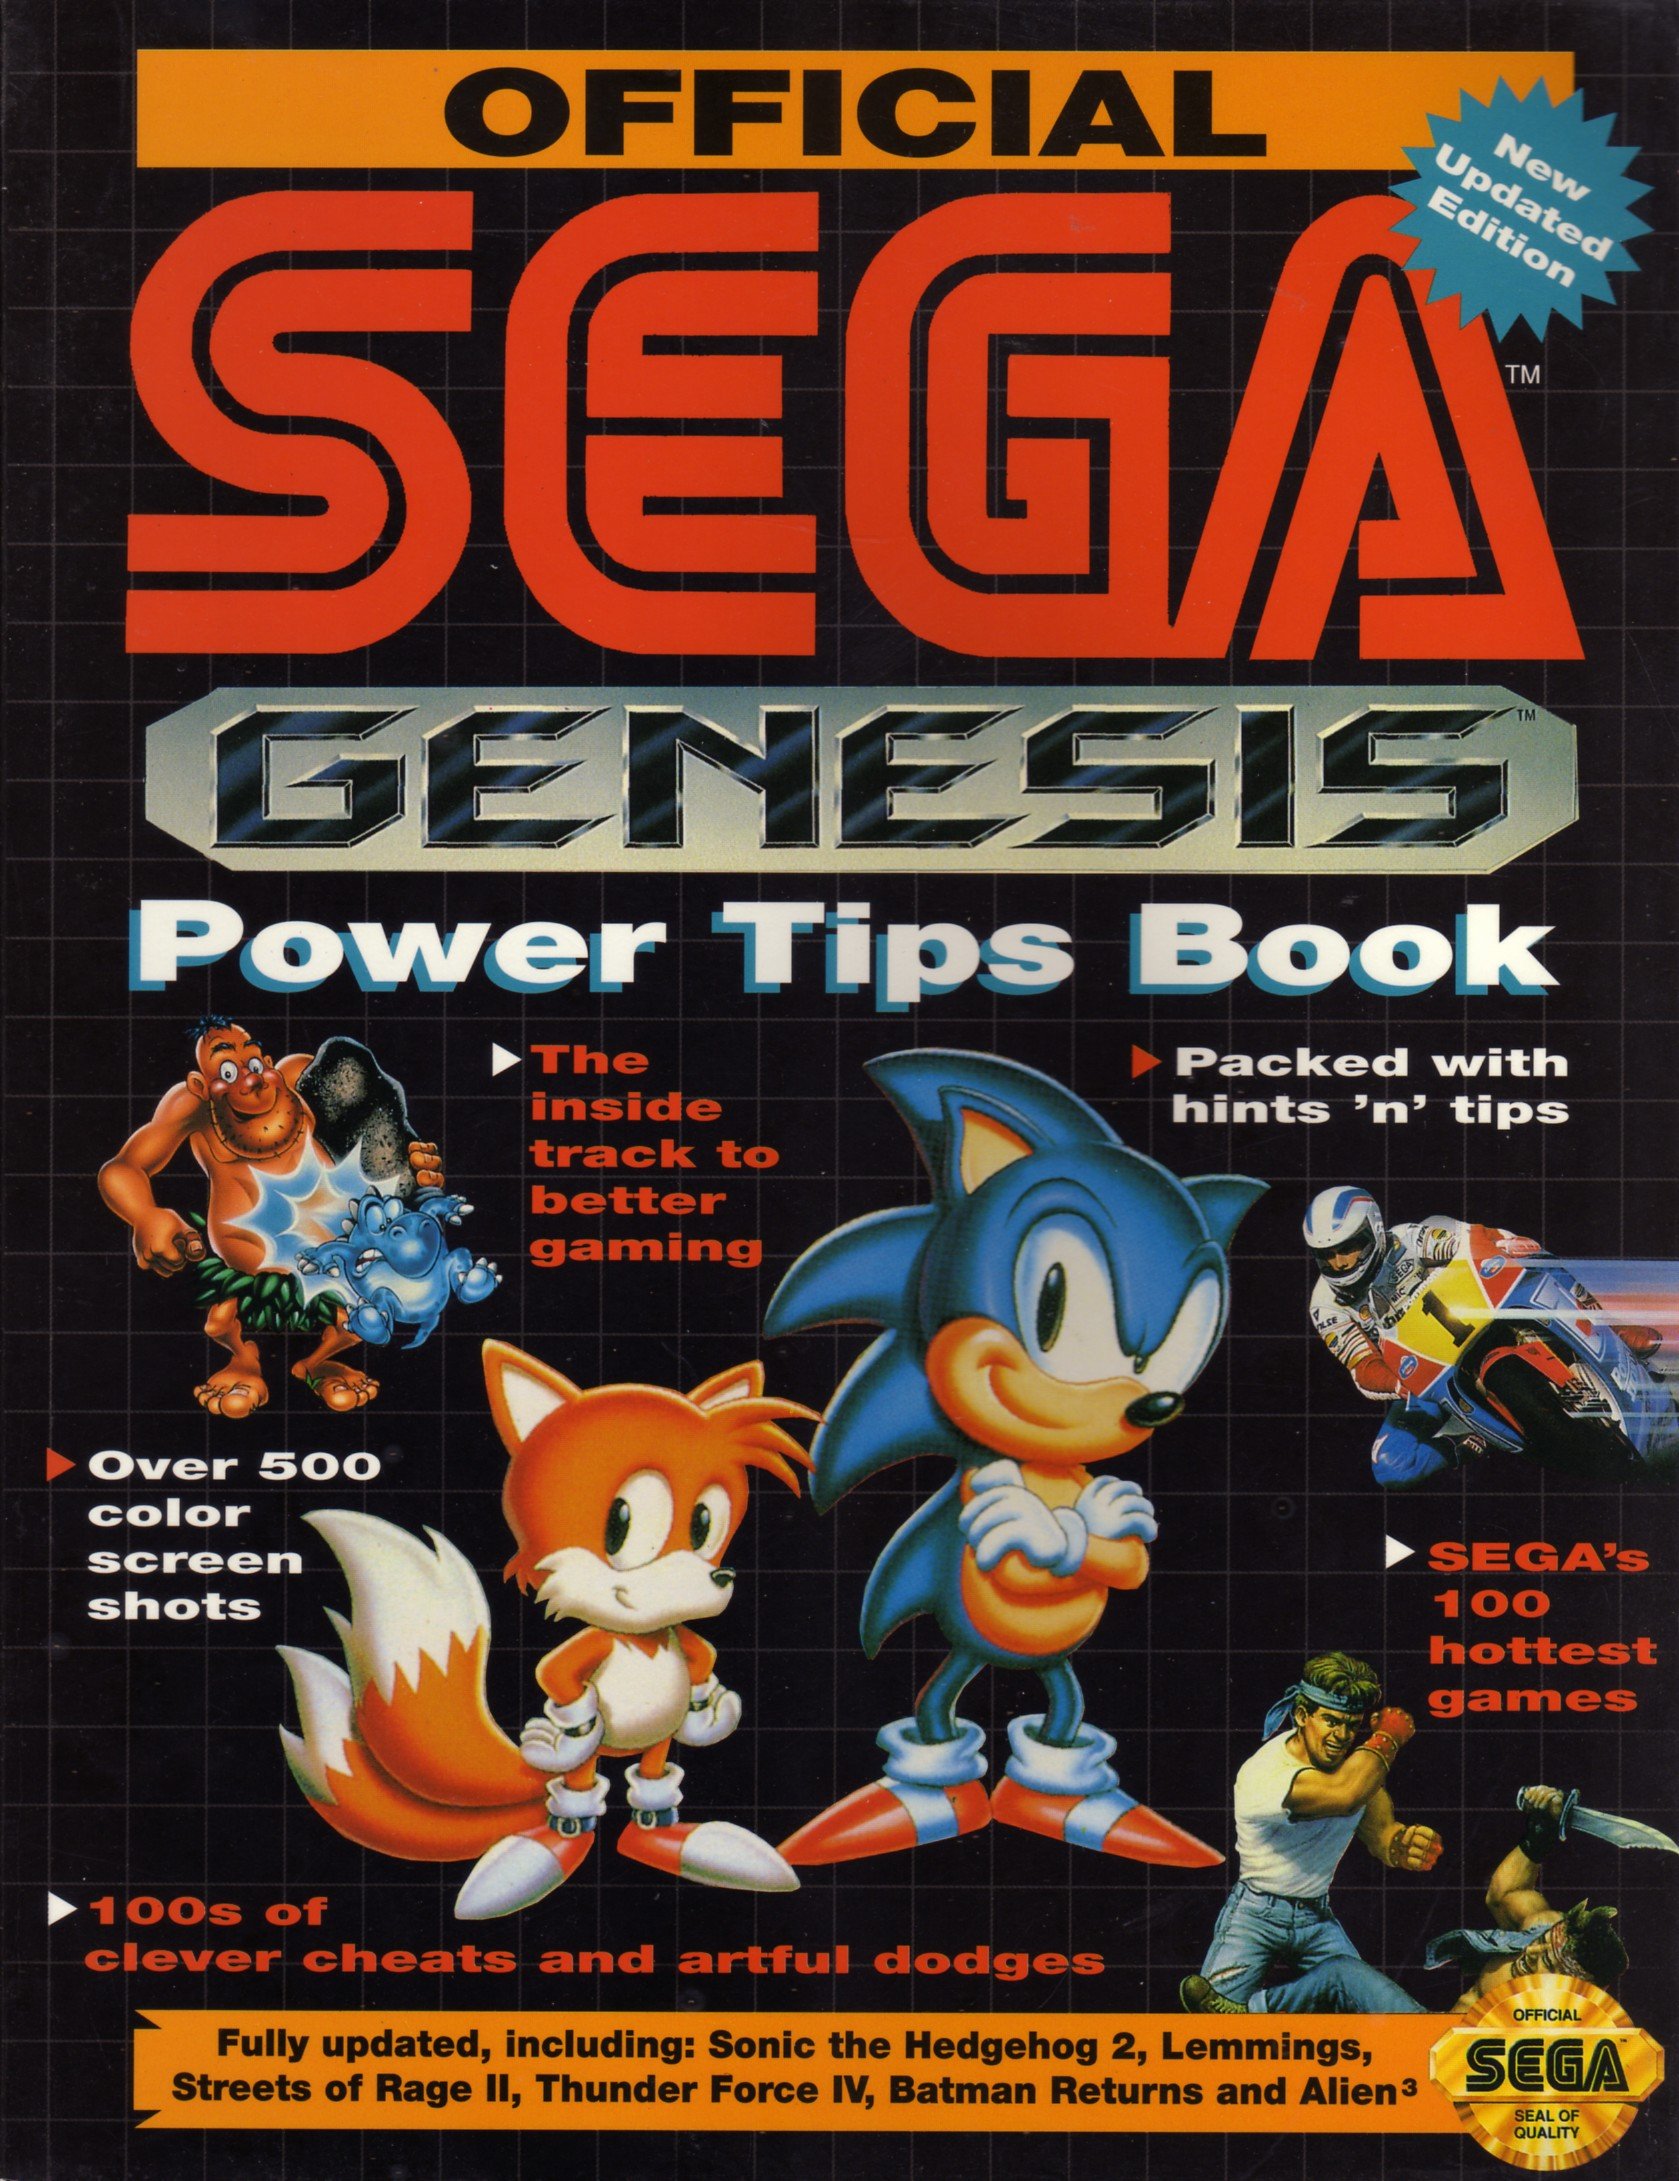 Official Sega Genesis Power Tips Book (New and Updated Edition)